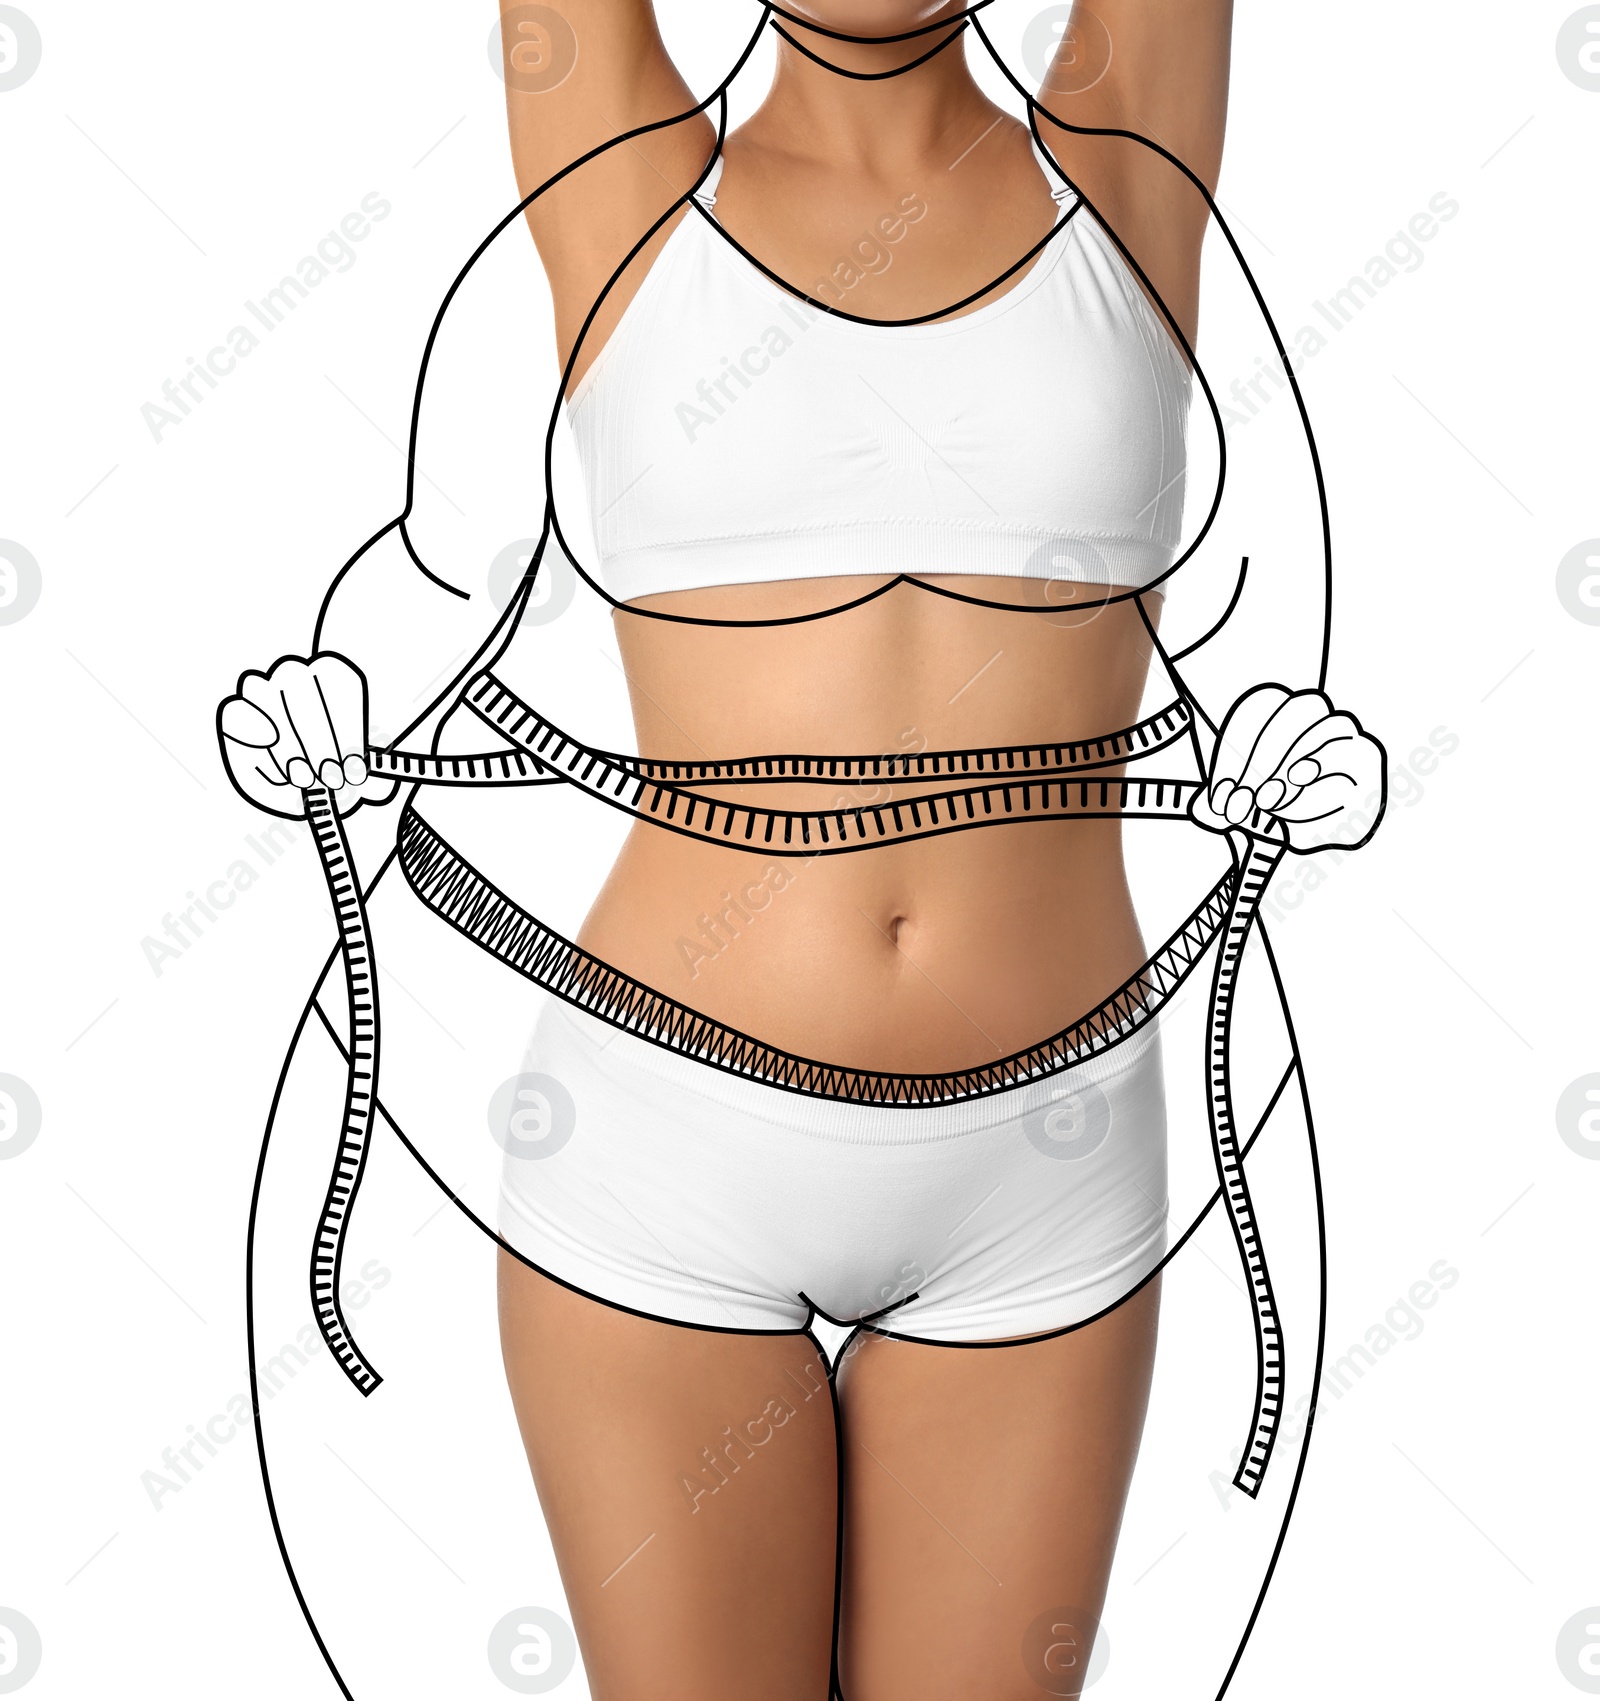 Image of Slim young woman after weight loss on white background, closeup view 